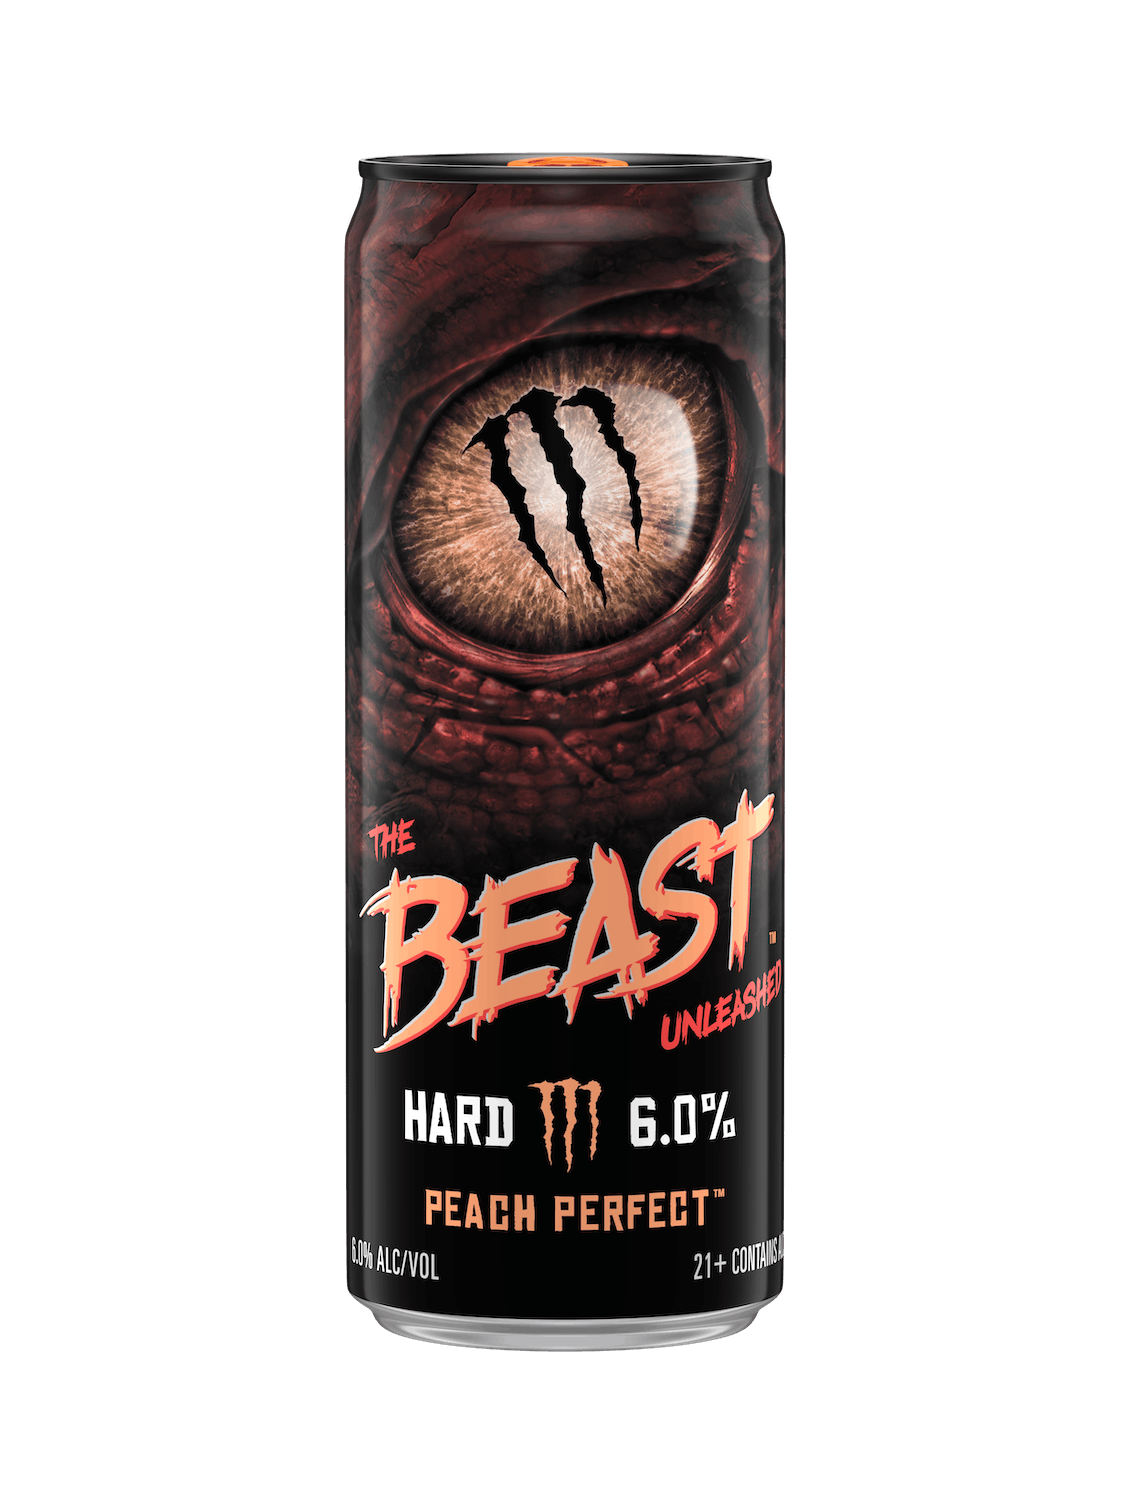 The Beast Unleashed by Monster. Perfect Peach